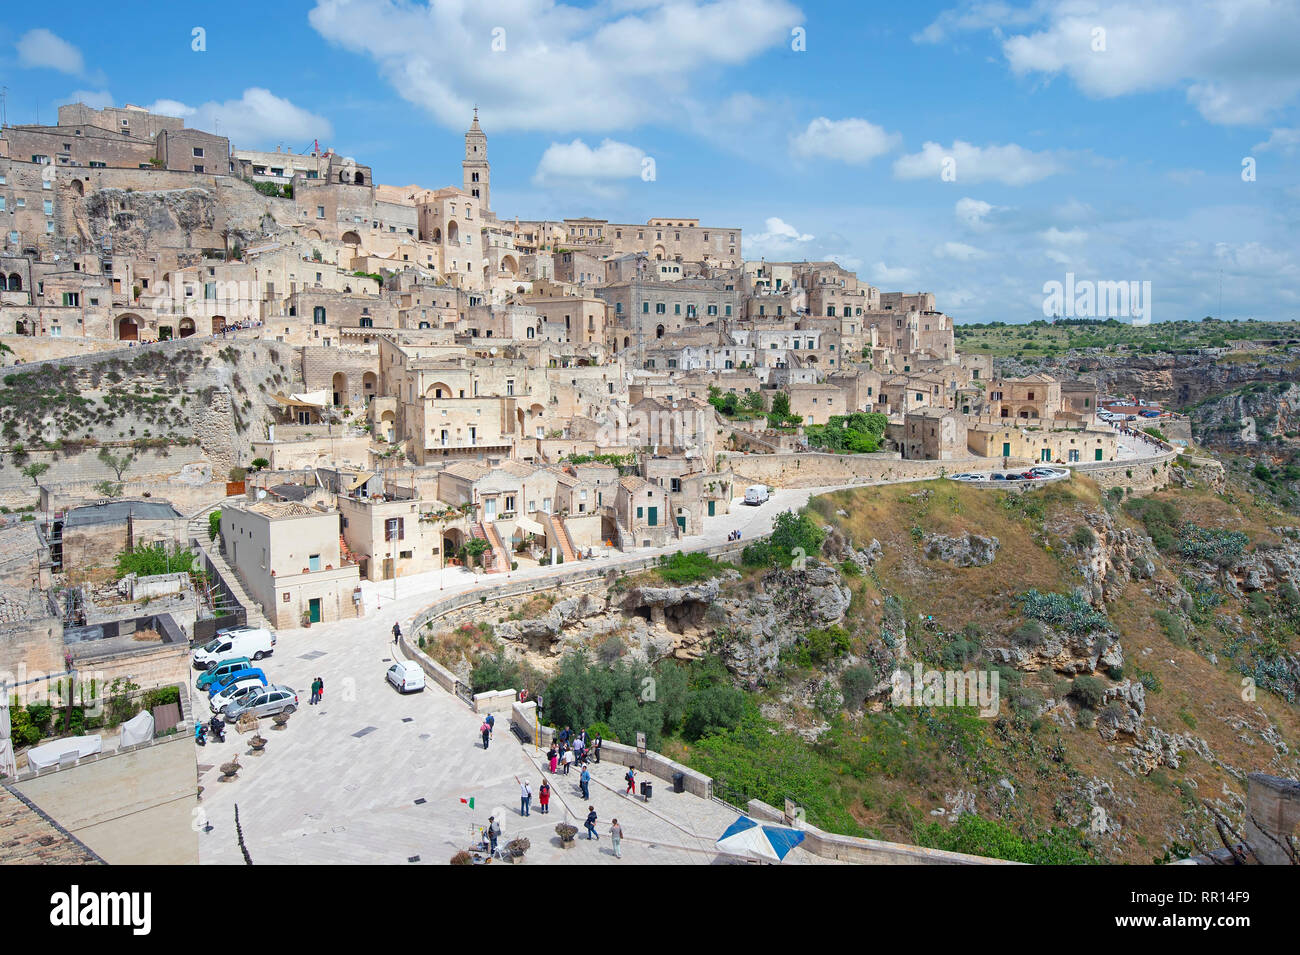 View on the Sasso Caveoso, Medieval old town, Sassi di Matera, Capital of Culture 2019, Matera, province of Basilicata, Italy Stock Photo